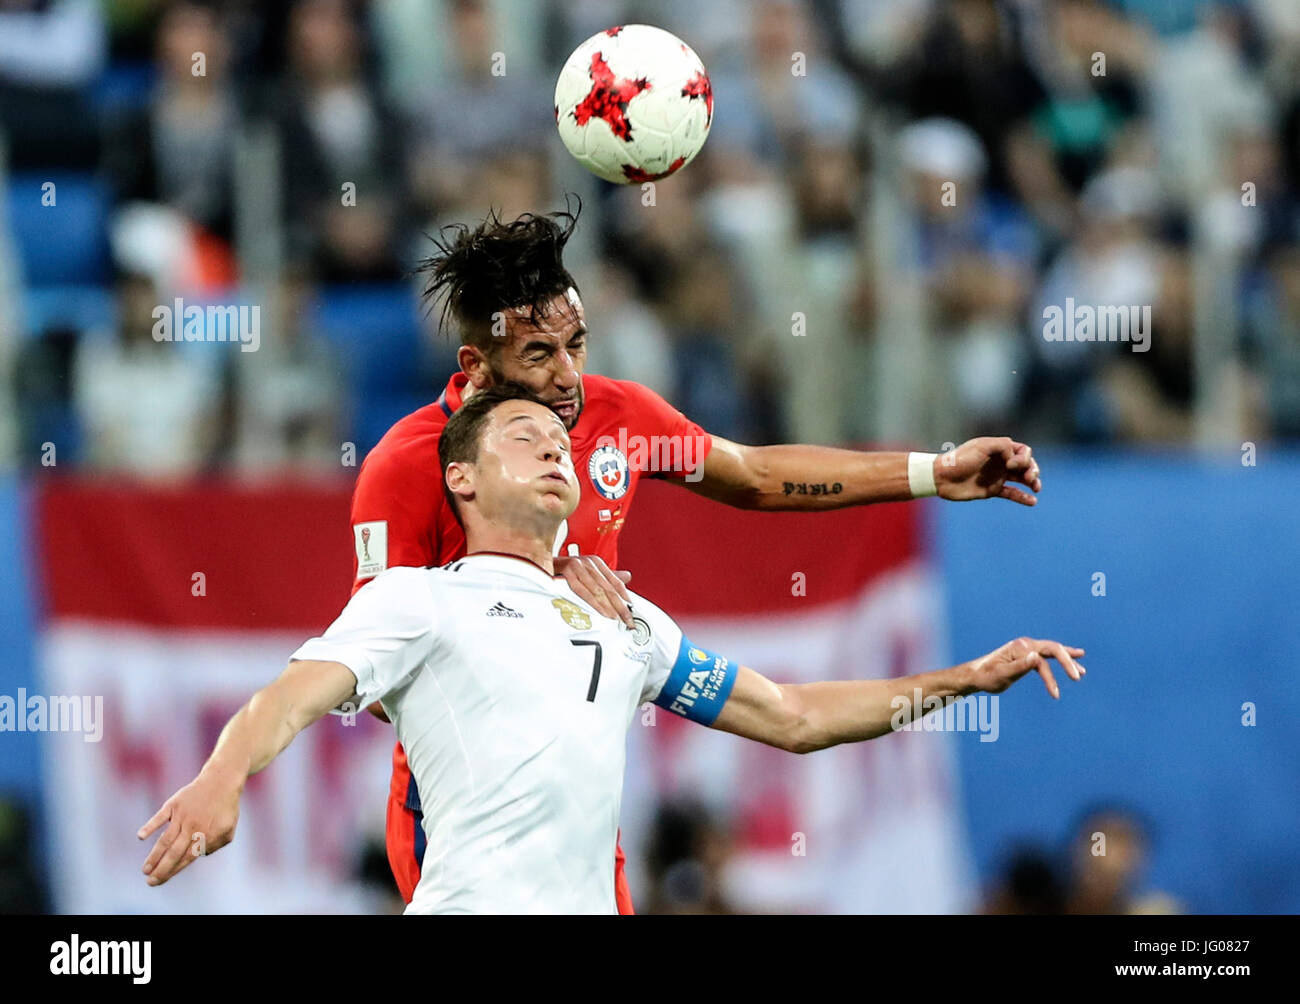 St. Petersburg, Russia. 2nd July, 2017. Julian Draxler (Front) of Germany heads the ball with Mauricio Isla of Chile during the final match between Chile and Germany at the 2017 FIFA Confederations Cup in St. Petersburg, Russia, on July 2, 2017. Germany claimed the title by defeating Chile with 1-0. Credit: Wu Zhuang/Xinhua/Alamy Live News Stock Photo